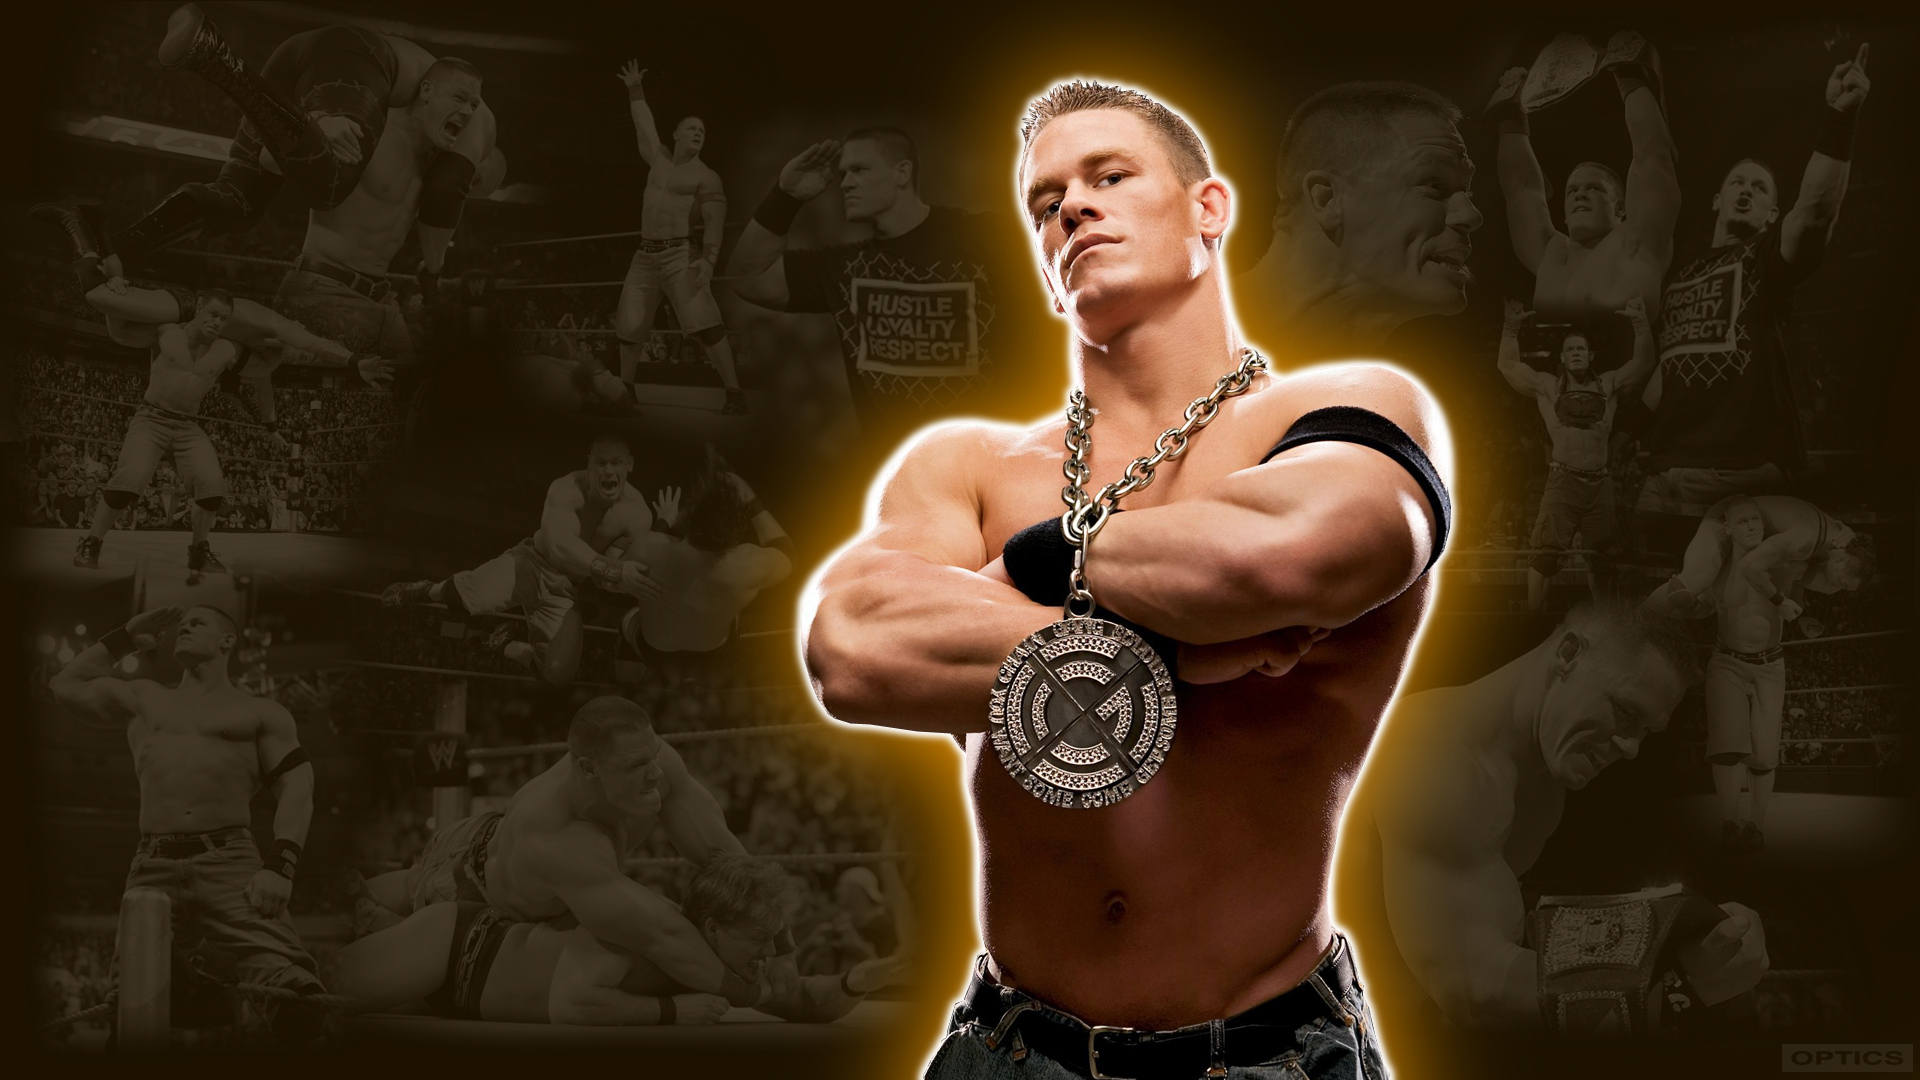 Wrestling Wallpaper Make Beautiful Desktop And You Say What A Cool Wwe